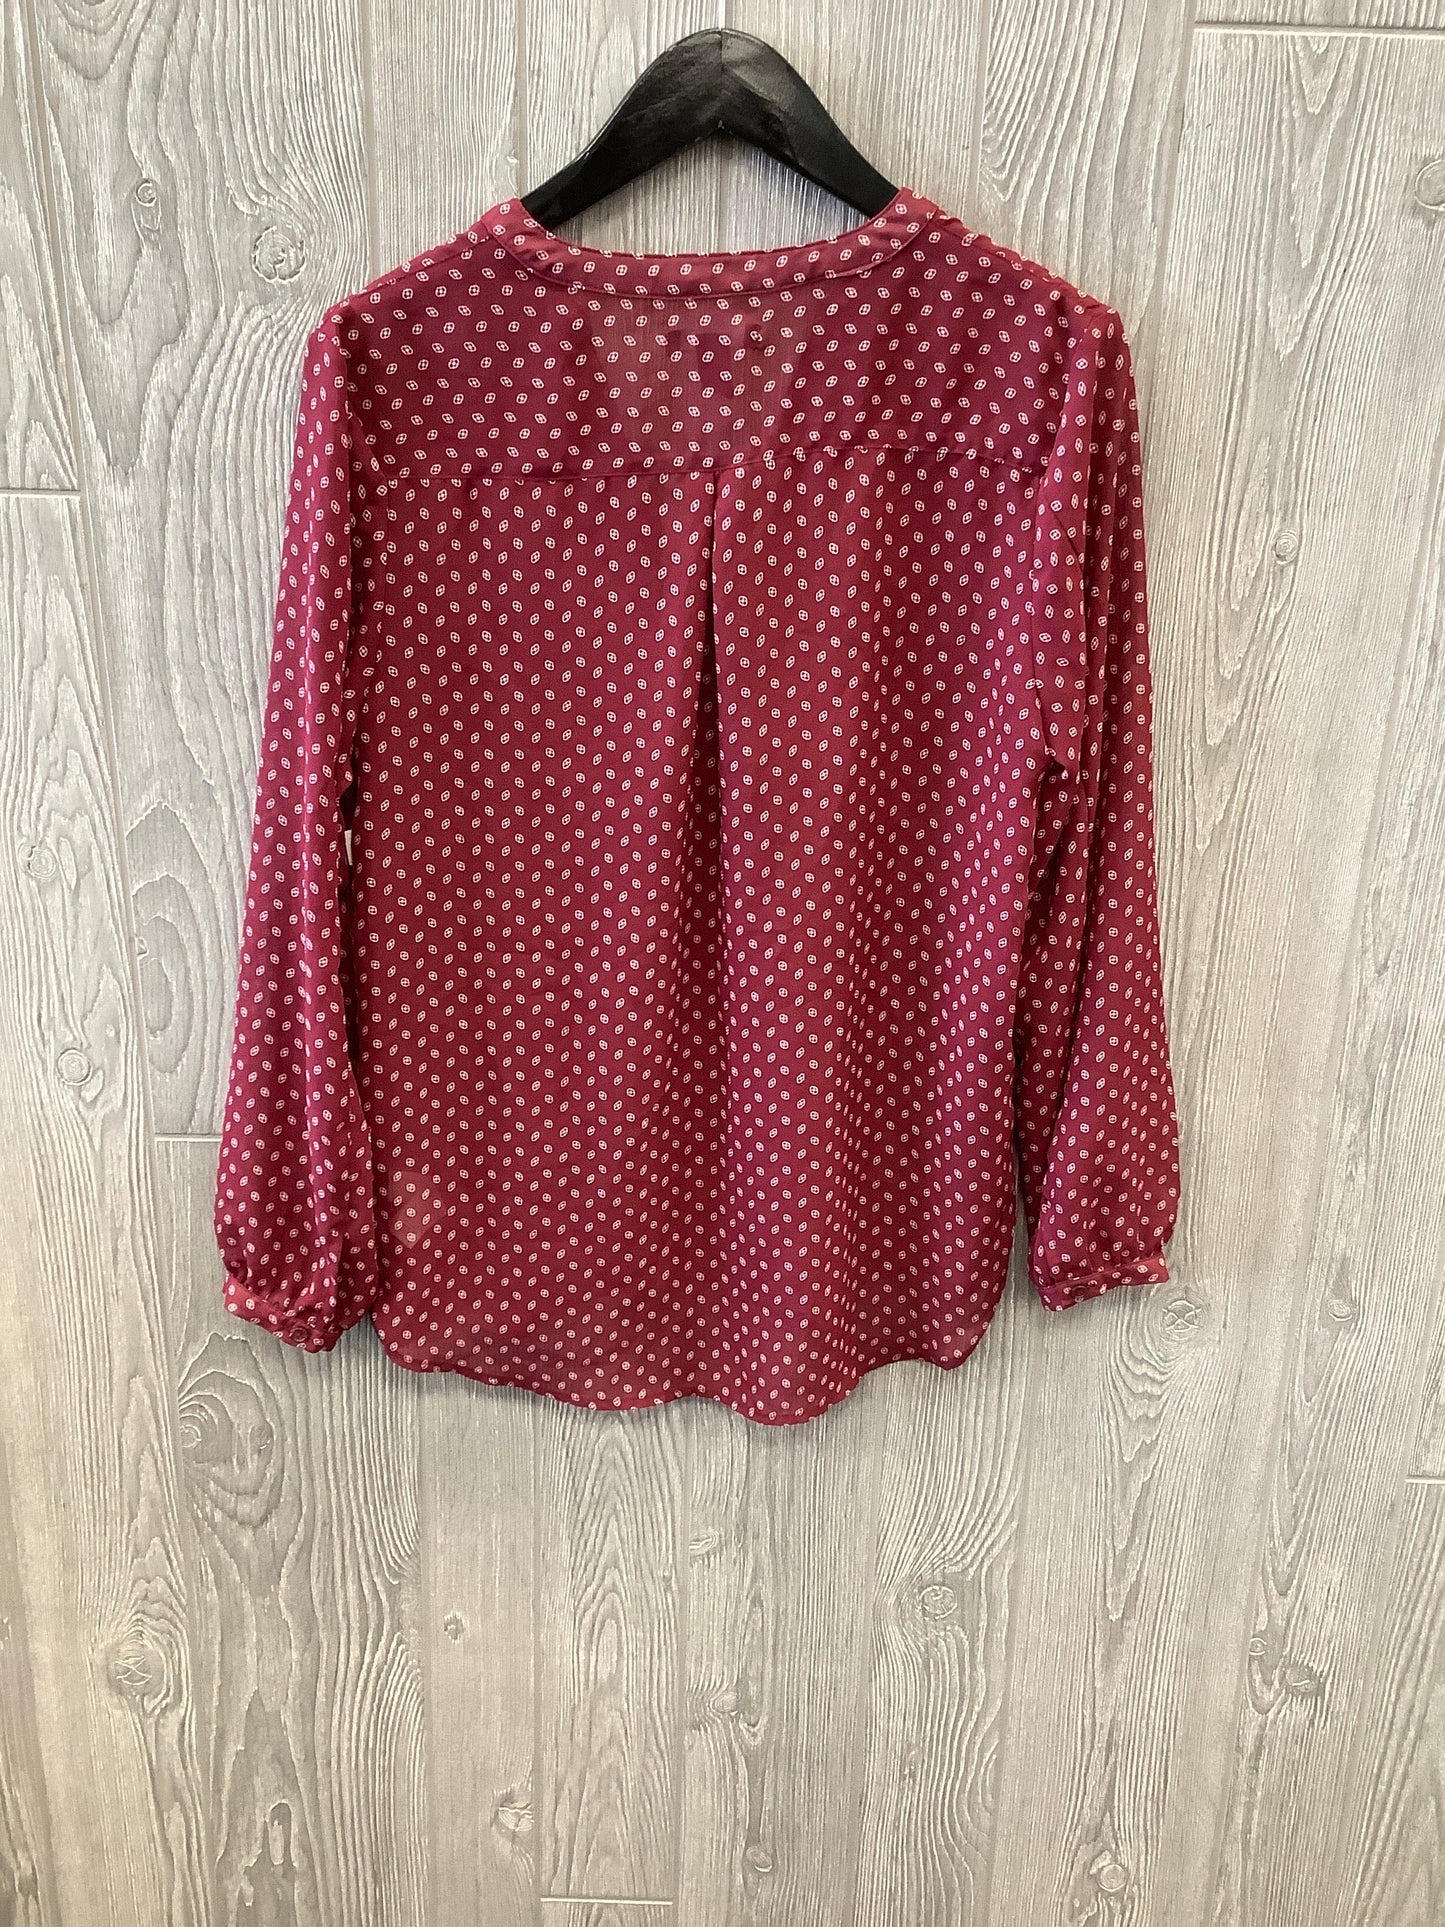 Red Top Long Sleeve Gap, Size S